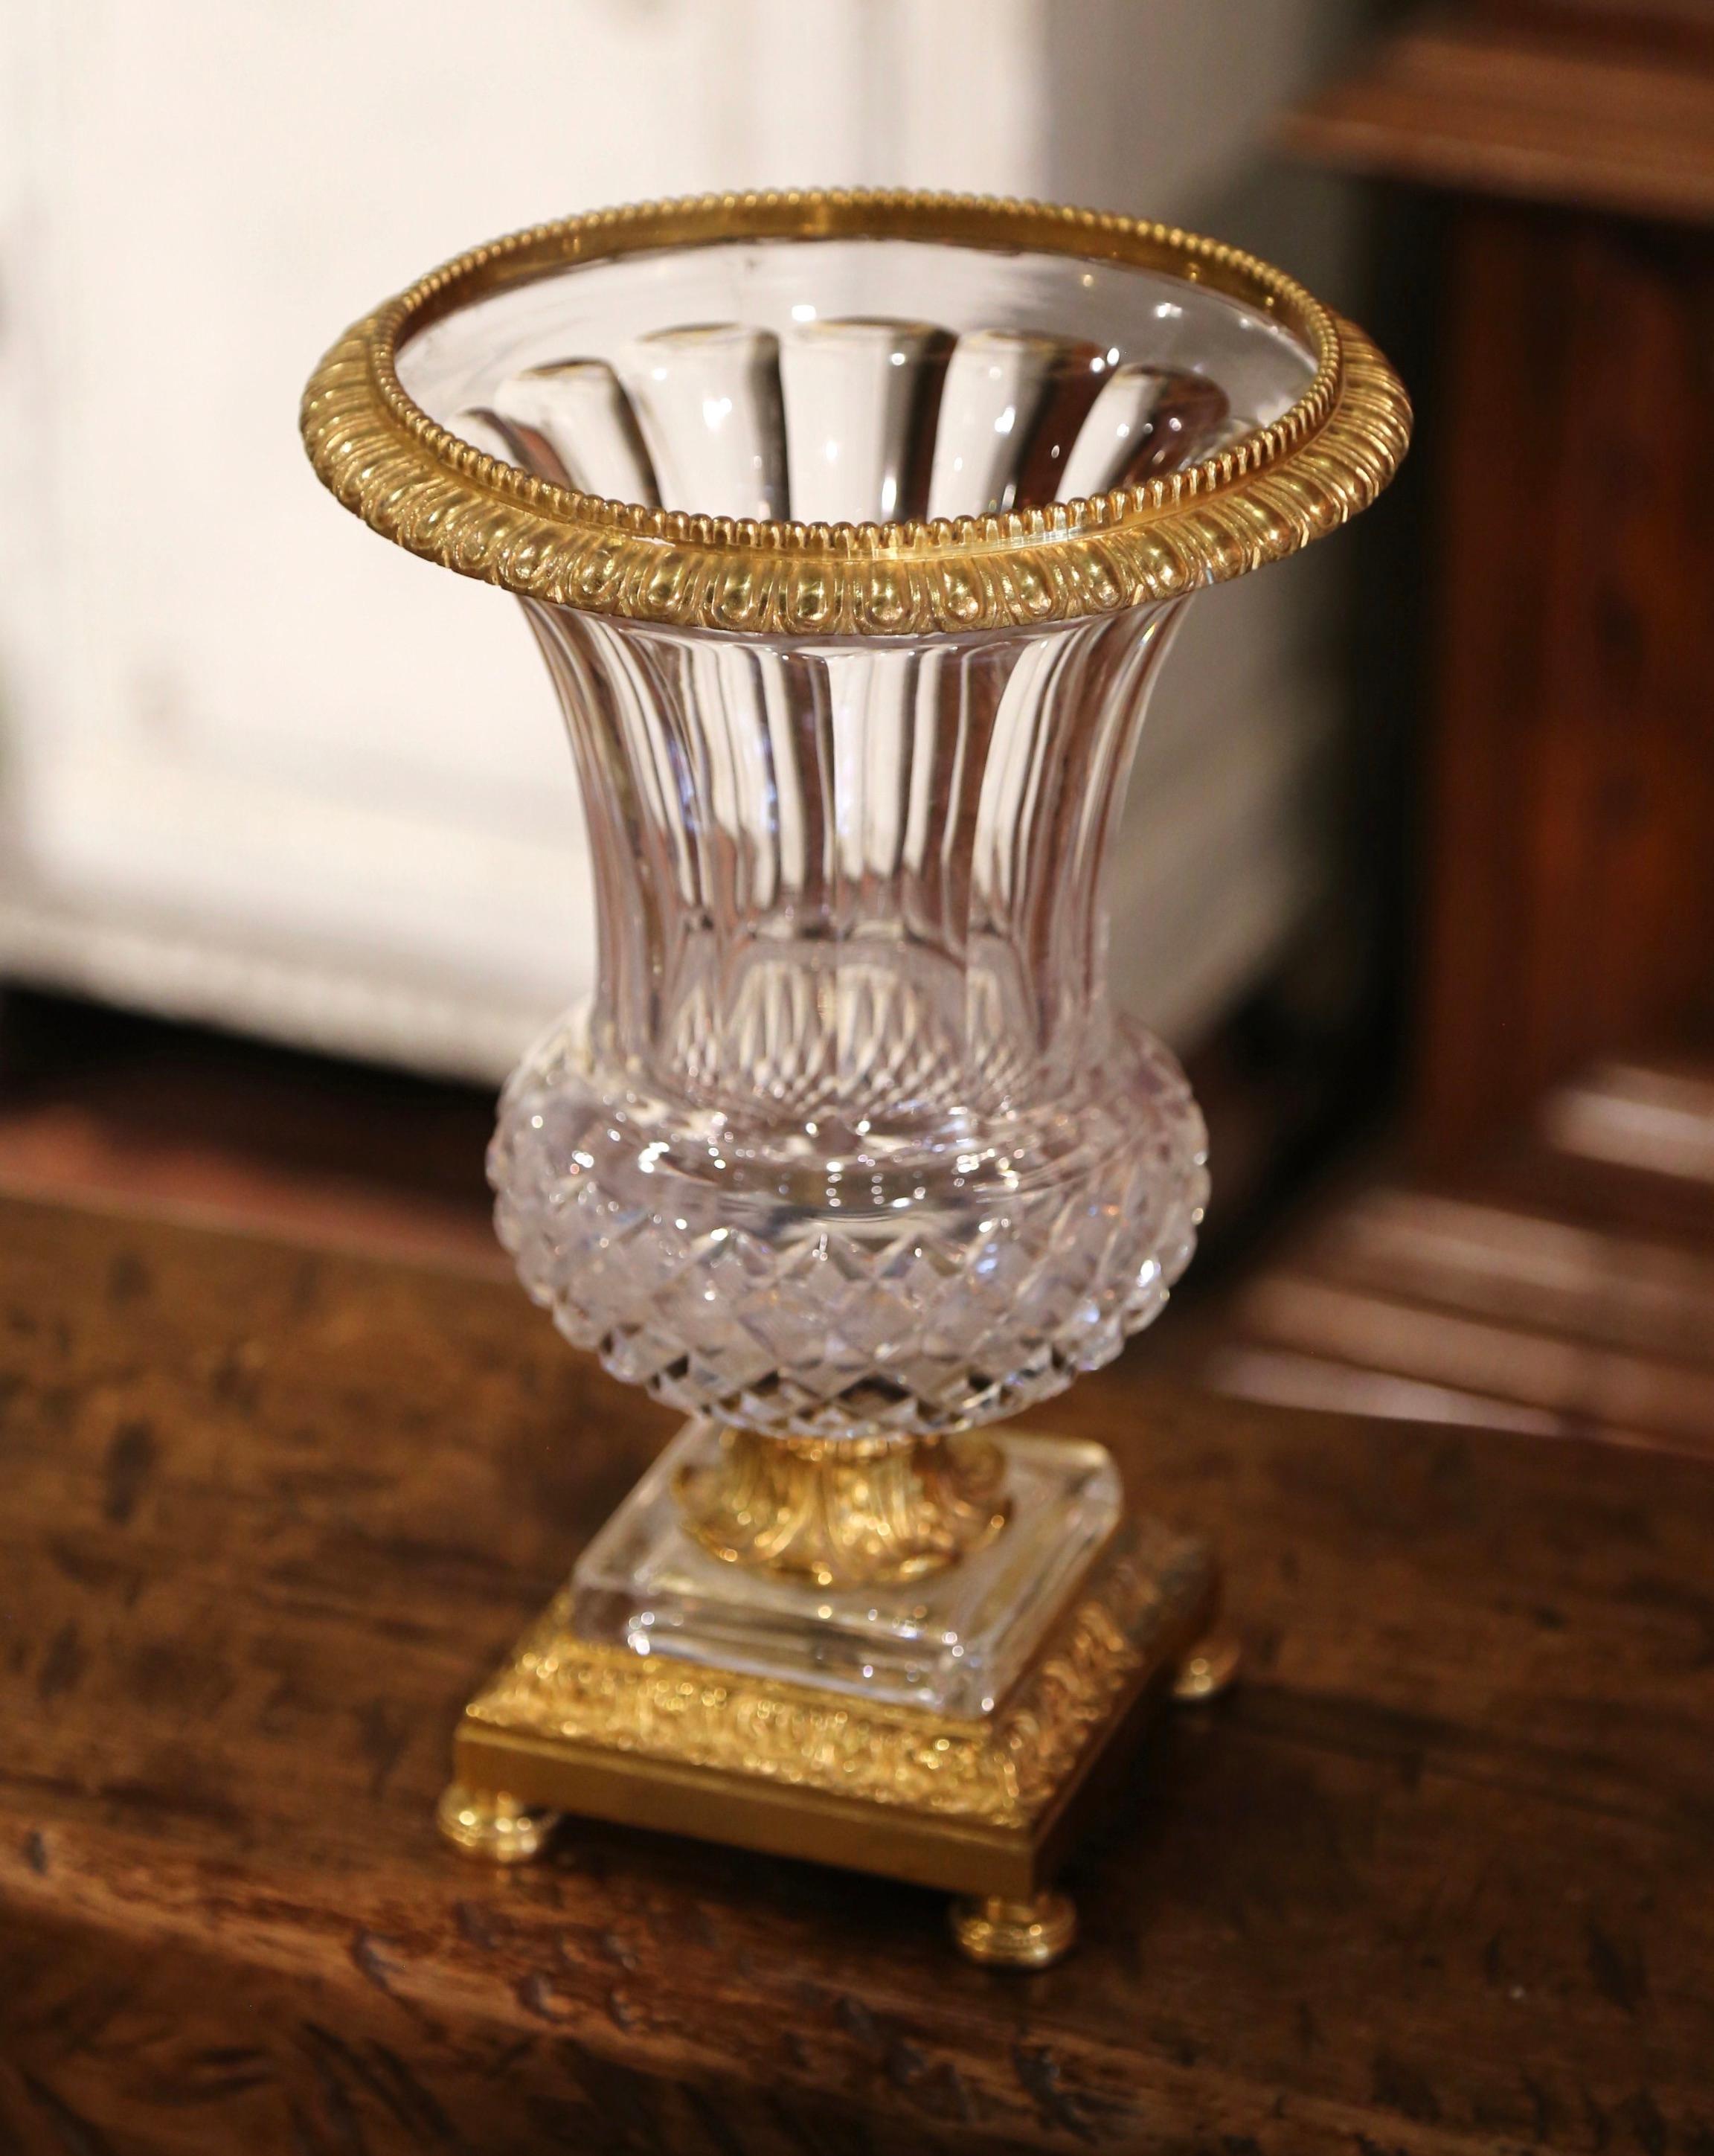 Created in France circa 1960, the elegant antique vessel shaped as a Medici vase is made of cut crystal decorated with bronze dore mounts; the vase stands on a square bronze base decorated with geometric motifs and ending with bun feet. The top is